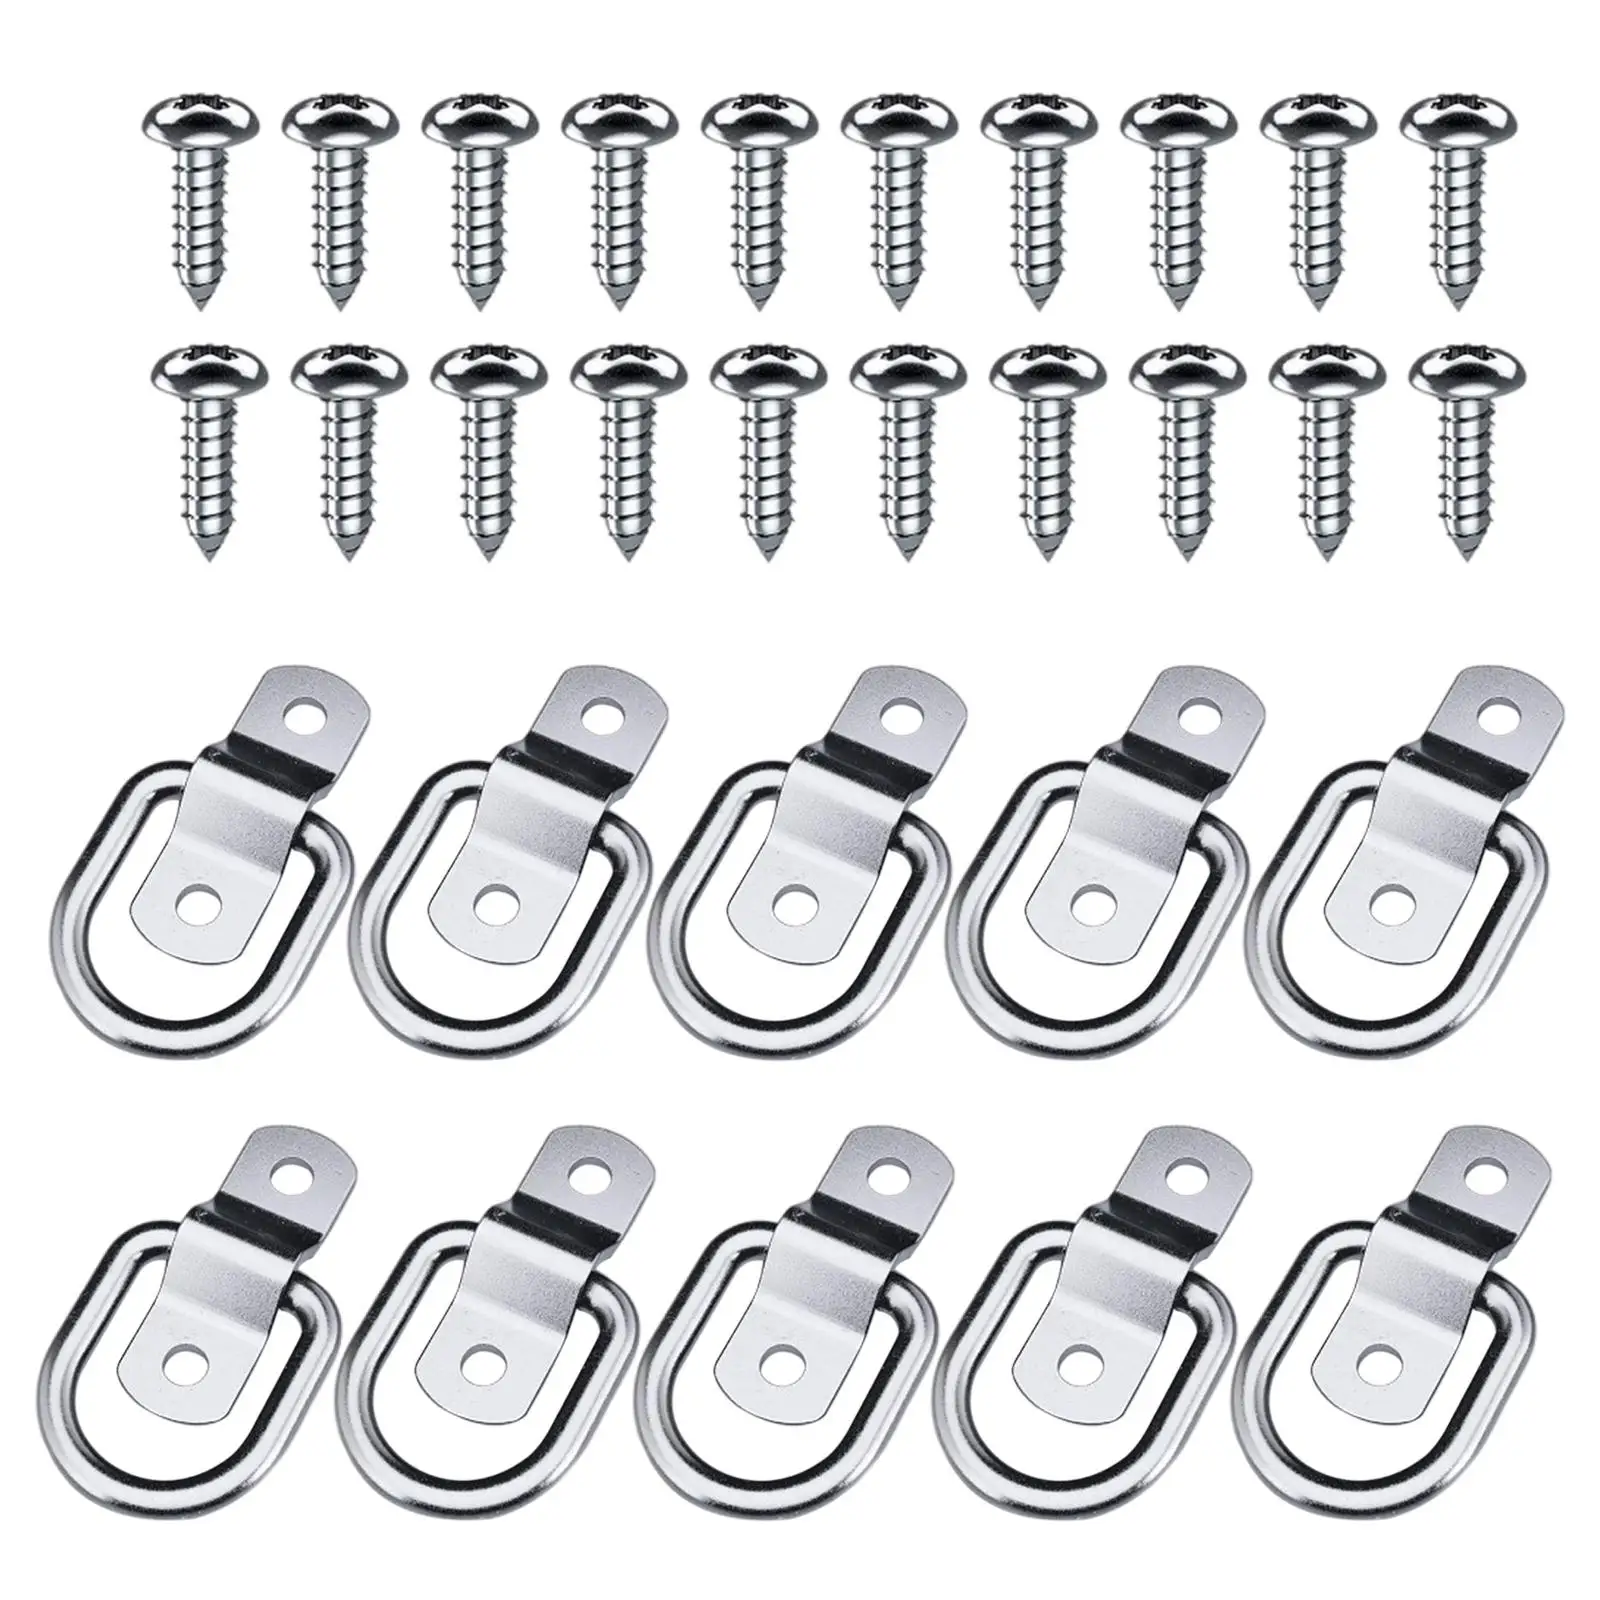 10 Pieces Bolt On D Rings with Screws Surface Mounting Heavy Duty Trailer Anchors Points Tie Downs for Trucks Trailers Canoe ATV